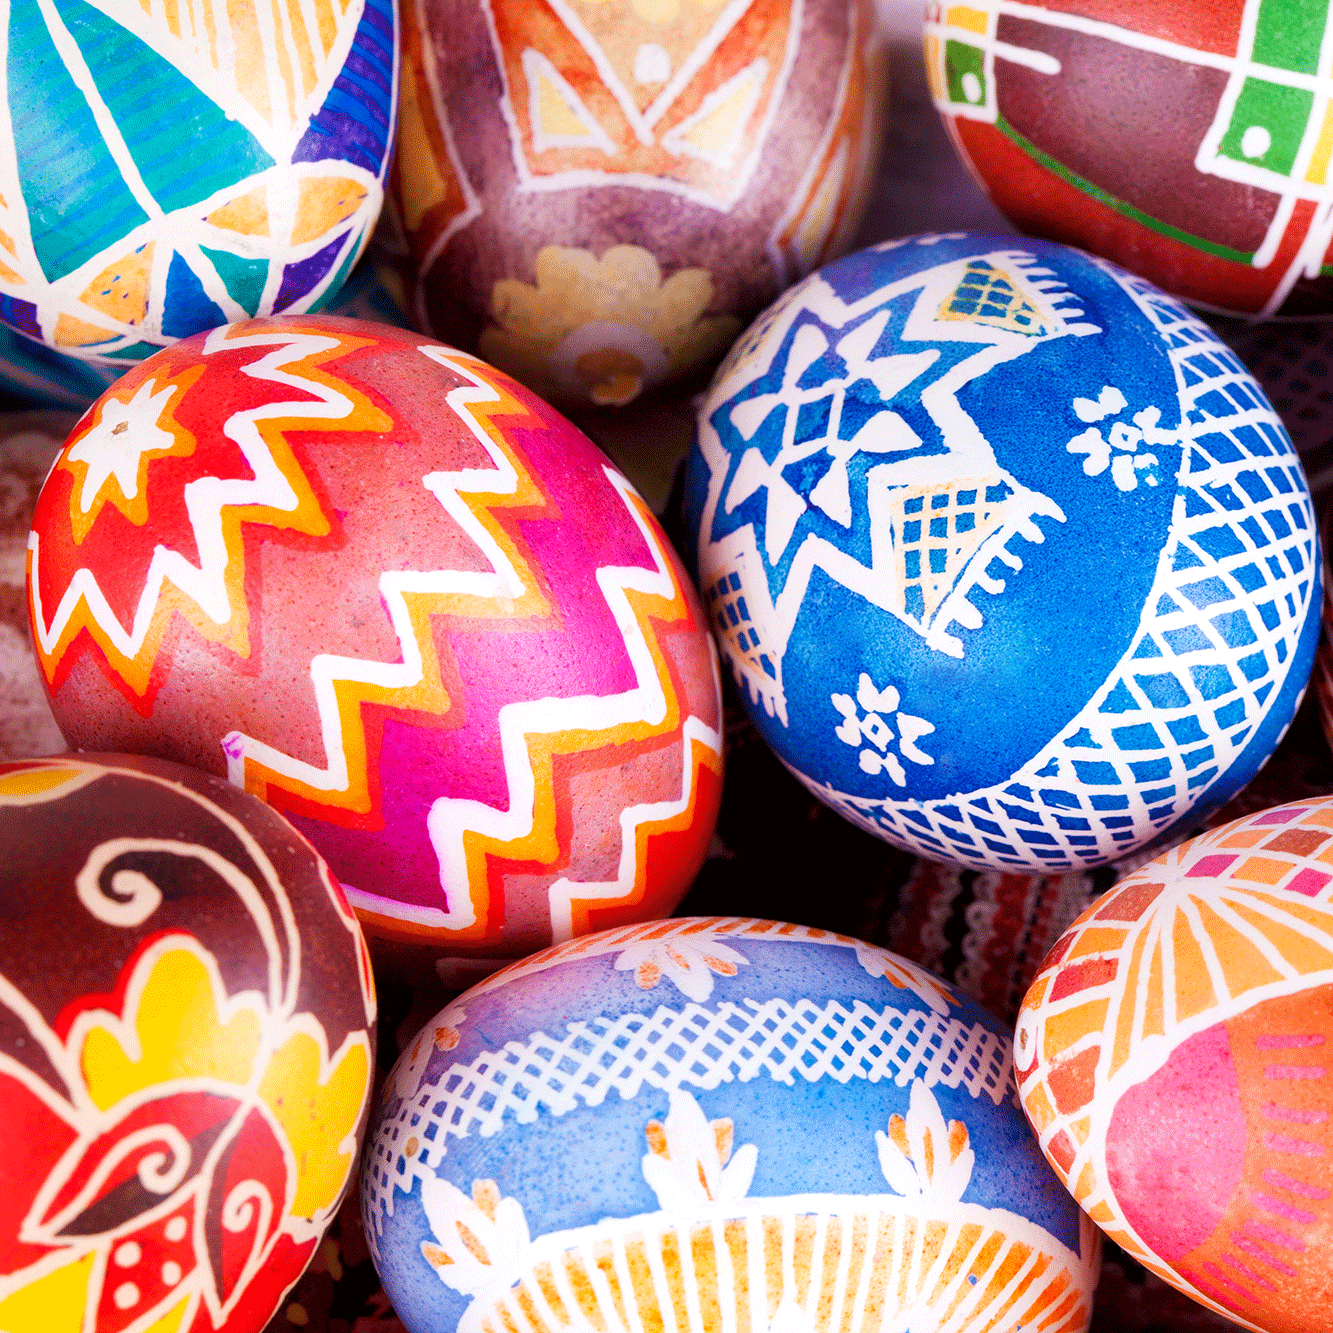 Eggs painted with bright patterns in blue, red, pink orange and yellow